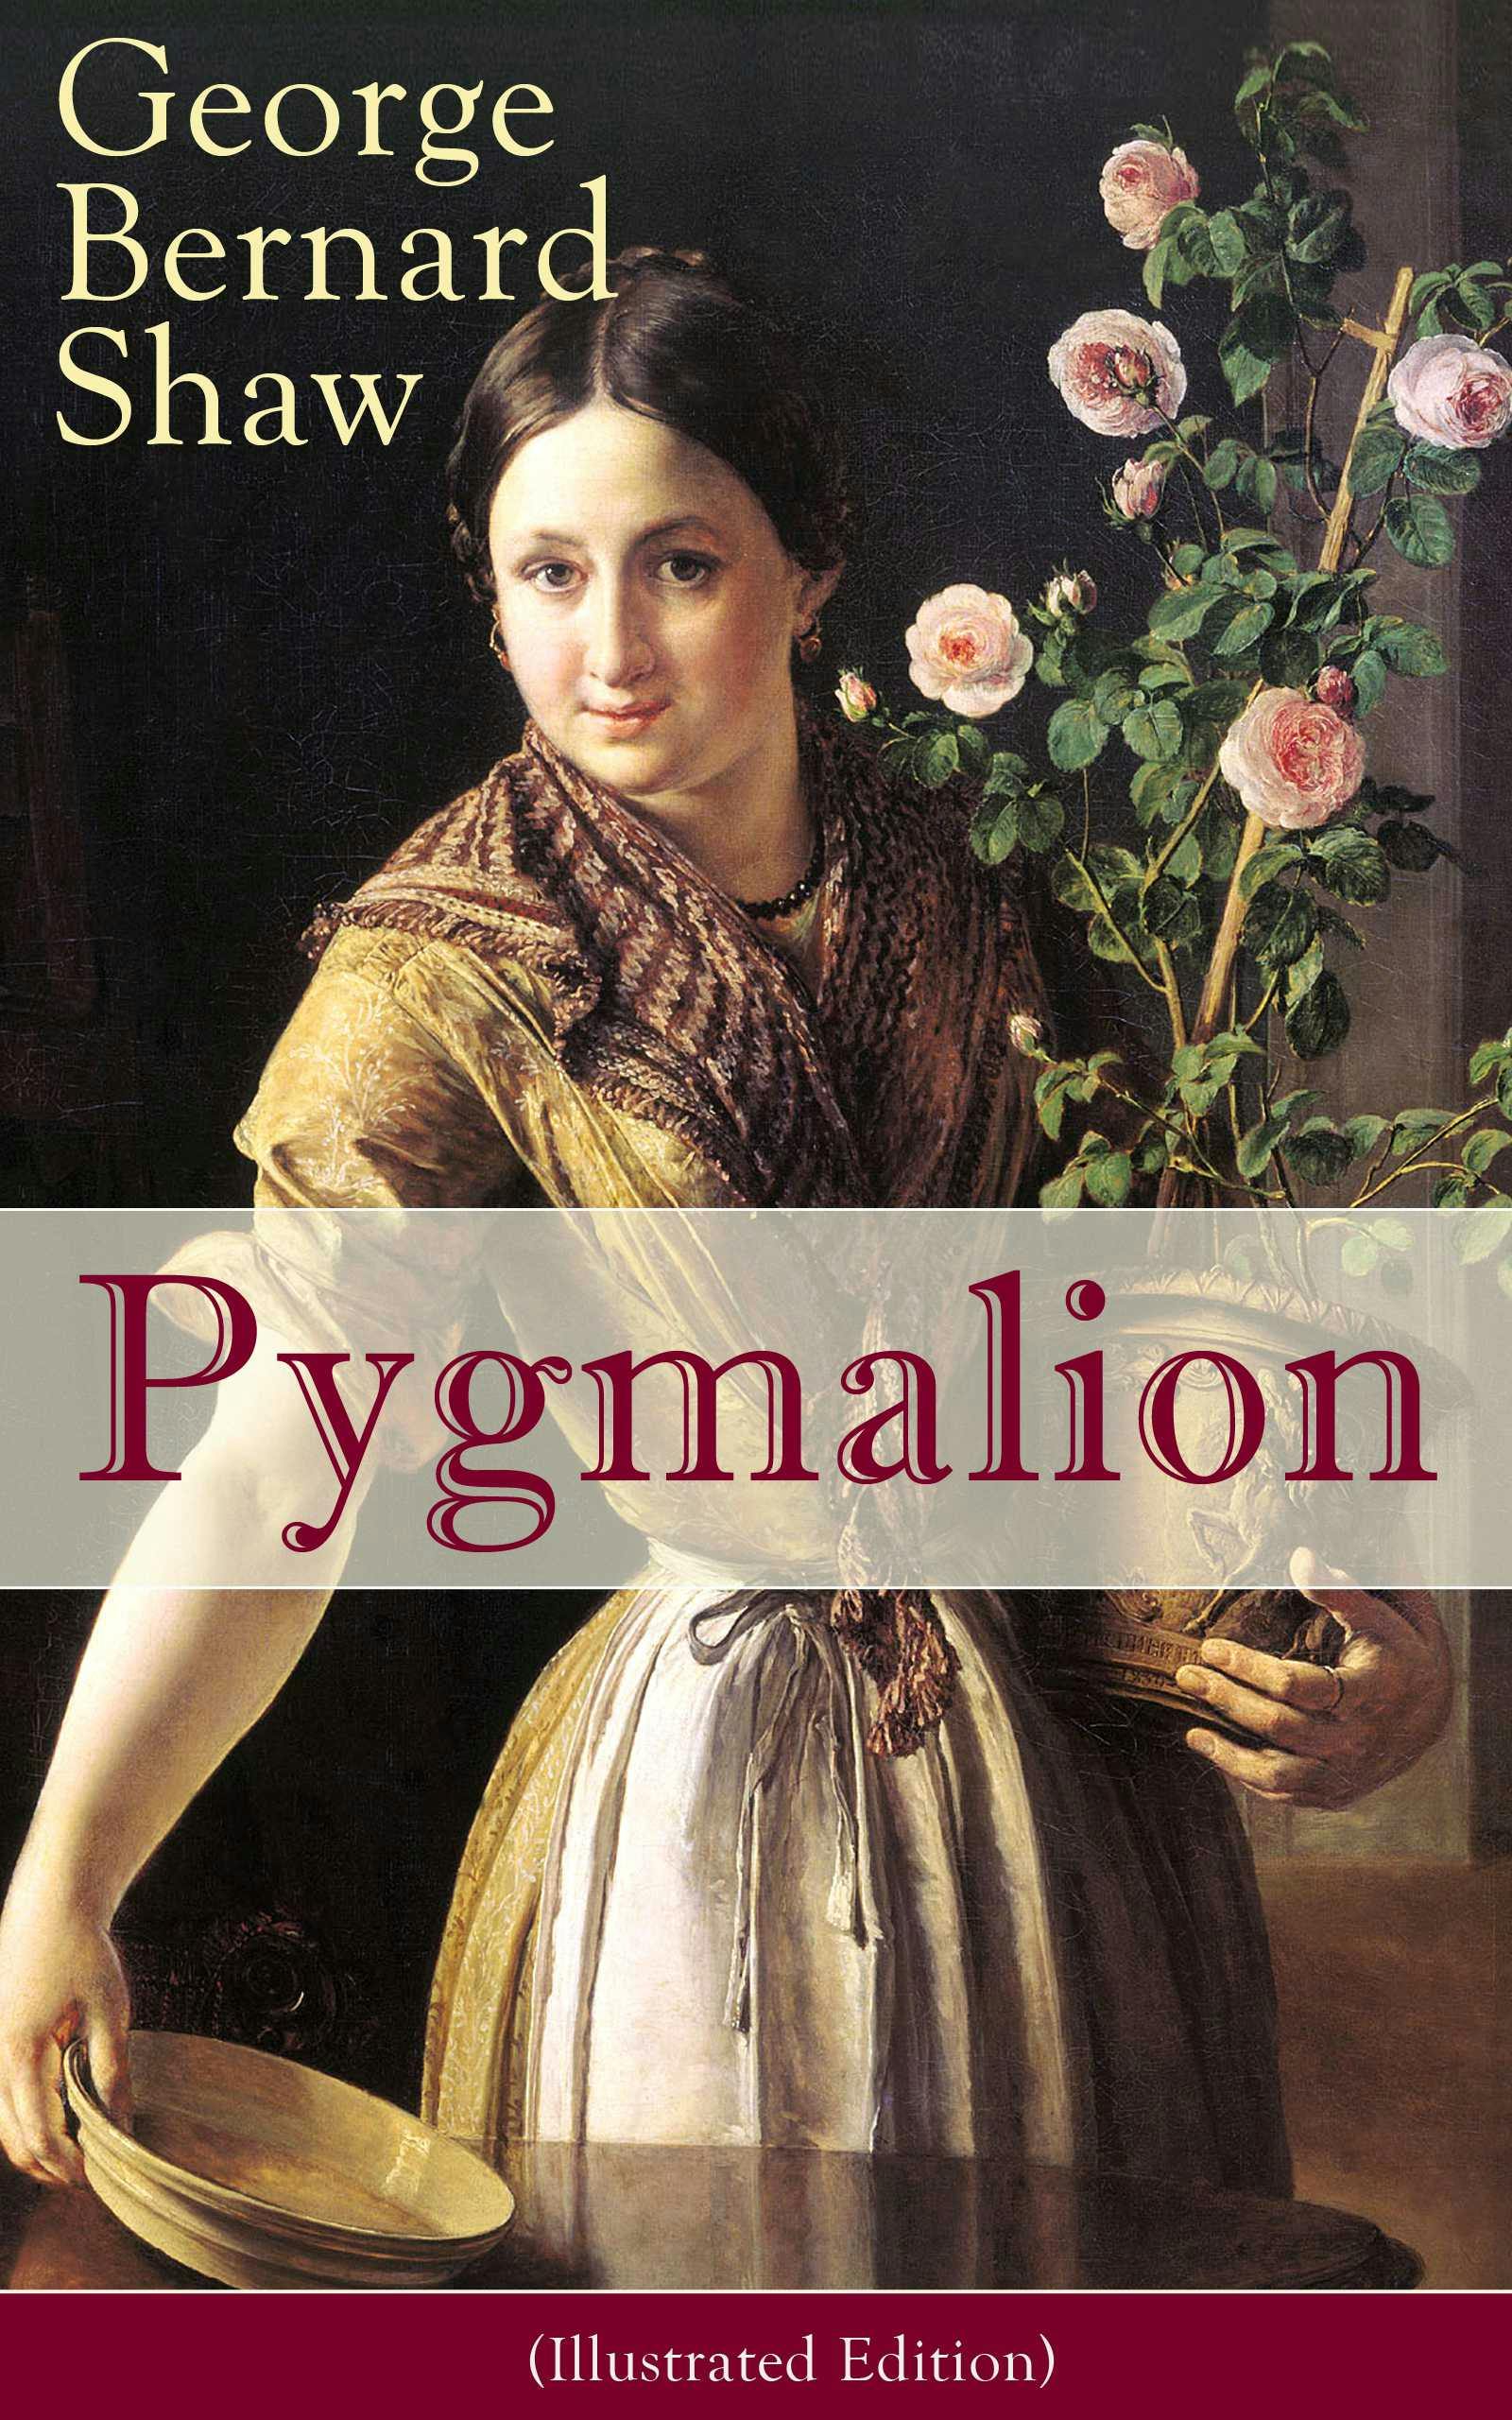 Pygmalion (Illustrated Edition): A Satirical Take on English Language and Englishmen From the Author of Renowned Plays like Mrs. Warren's Profession, Arms and The Man, Caesar And Cleopatra,  Man and Superman - George Bernard Shaw